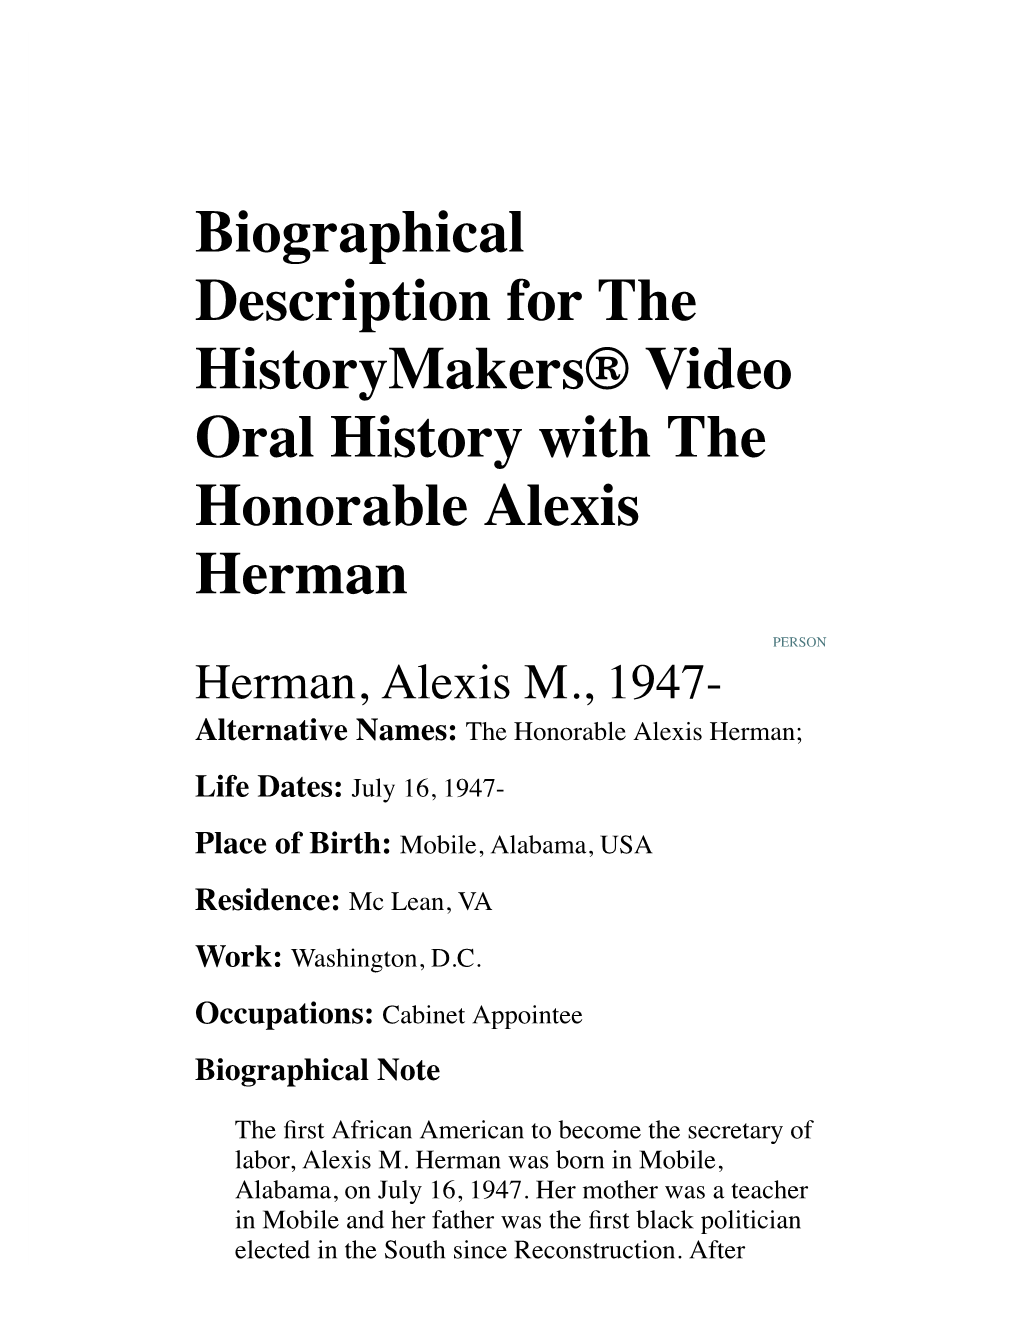 Biographical Description for the Historymakers® Video Oral History with the Honorable Alexis Herman